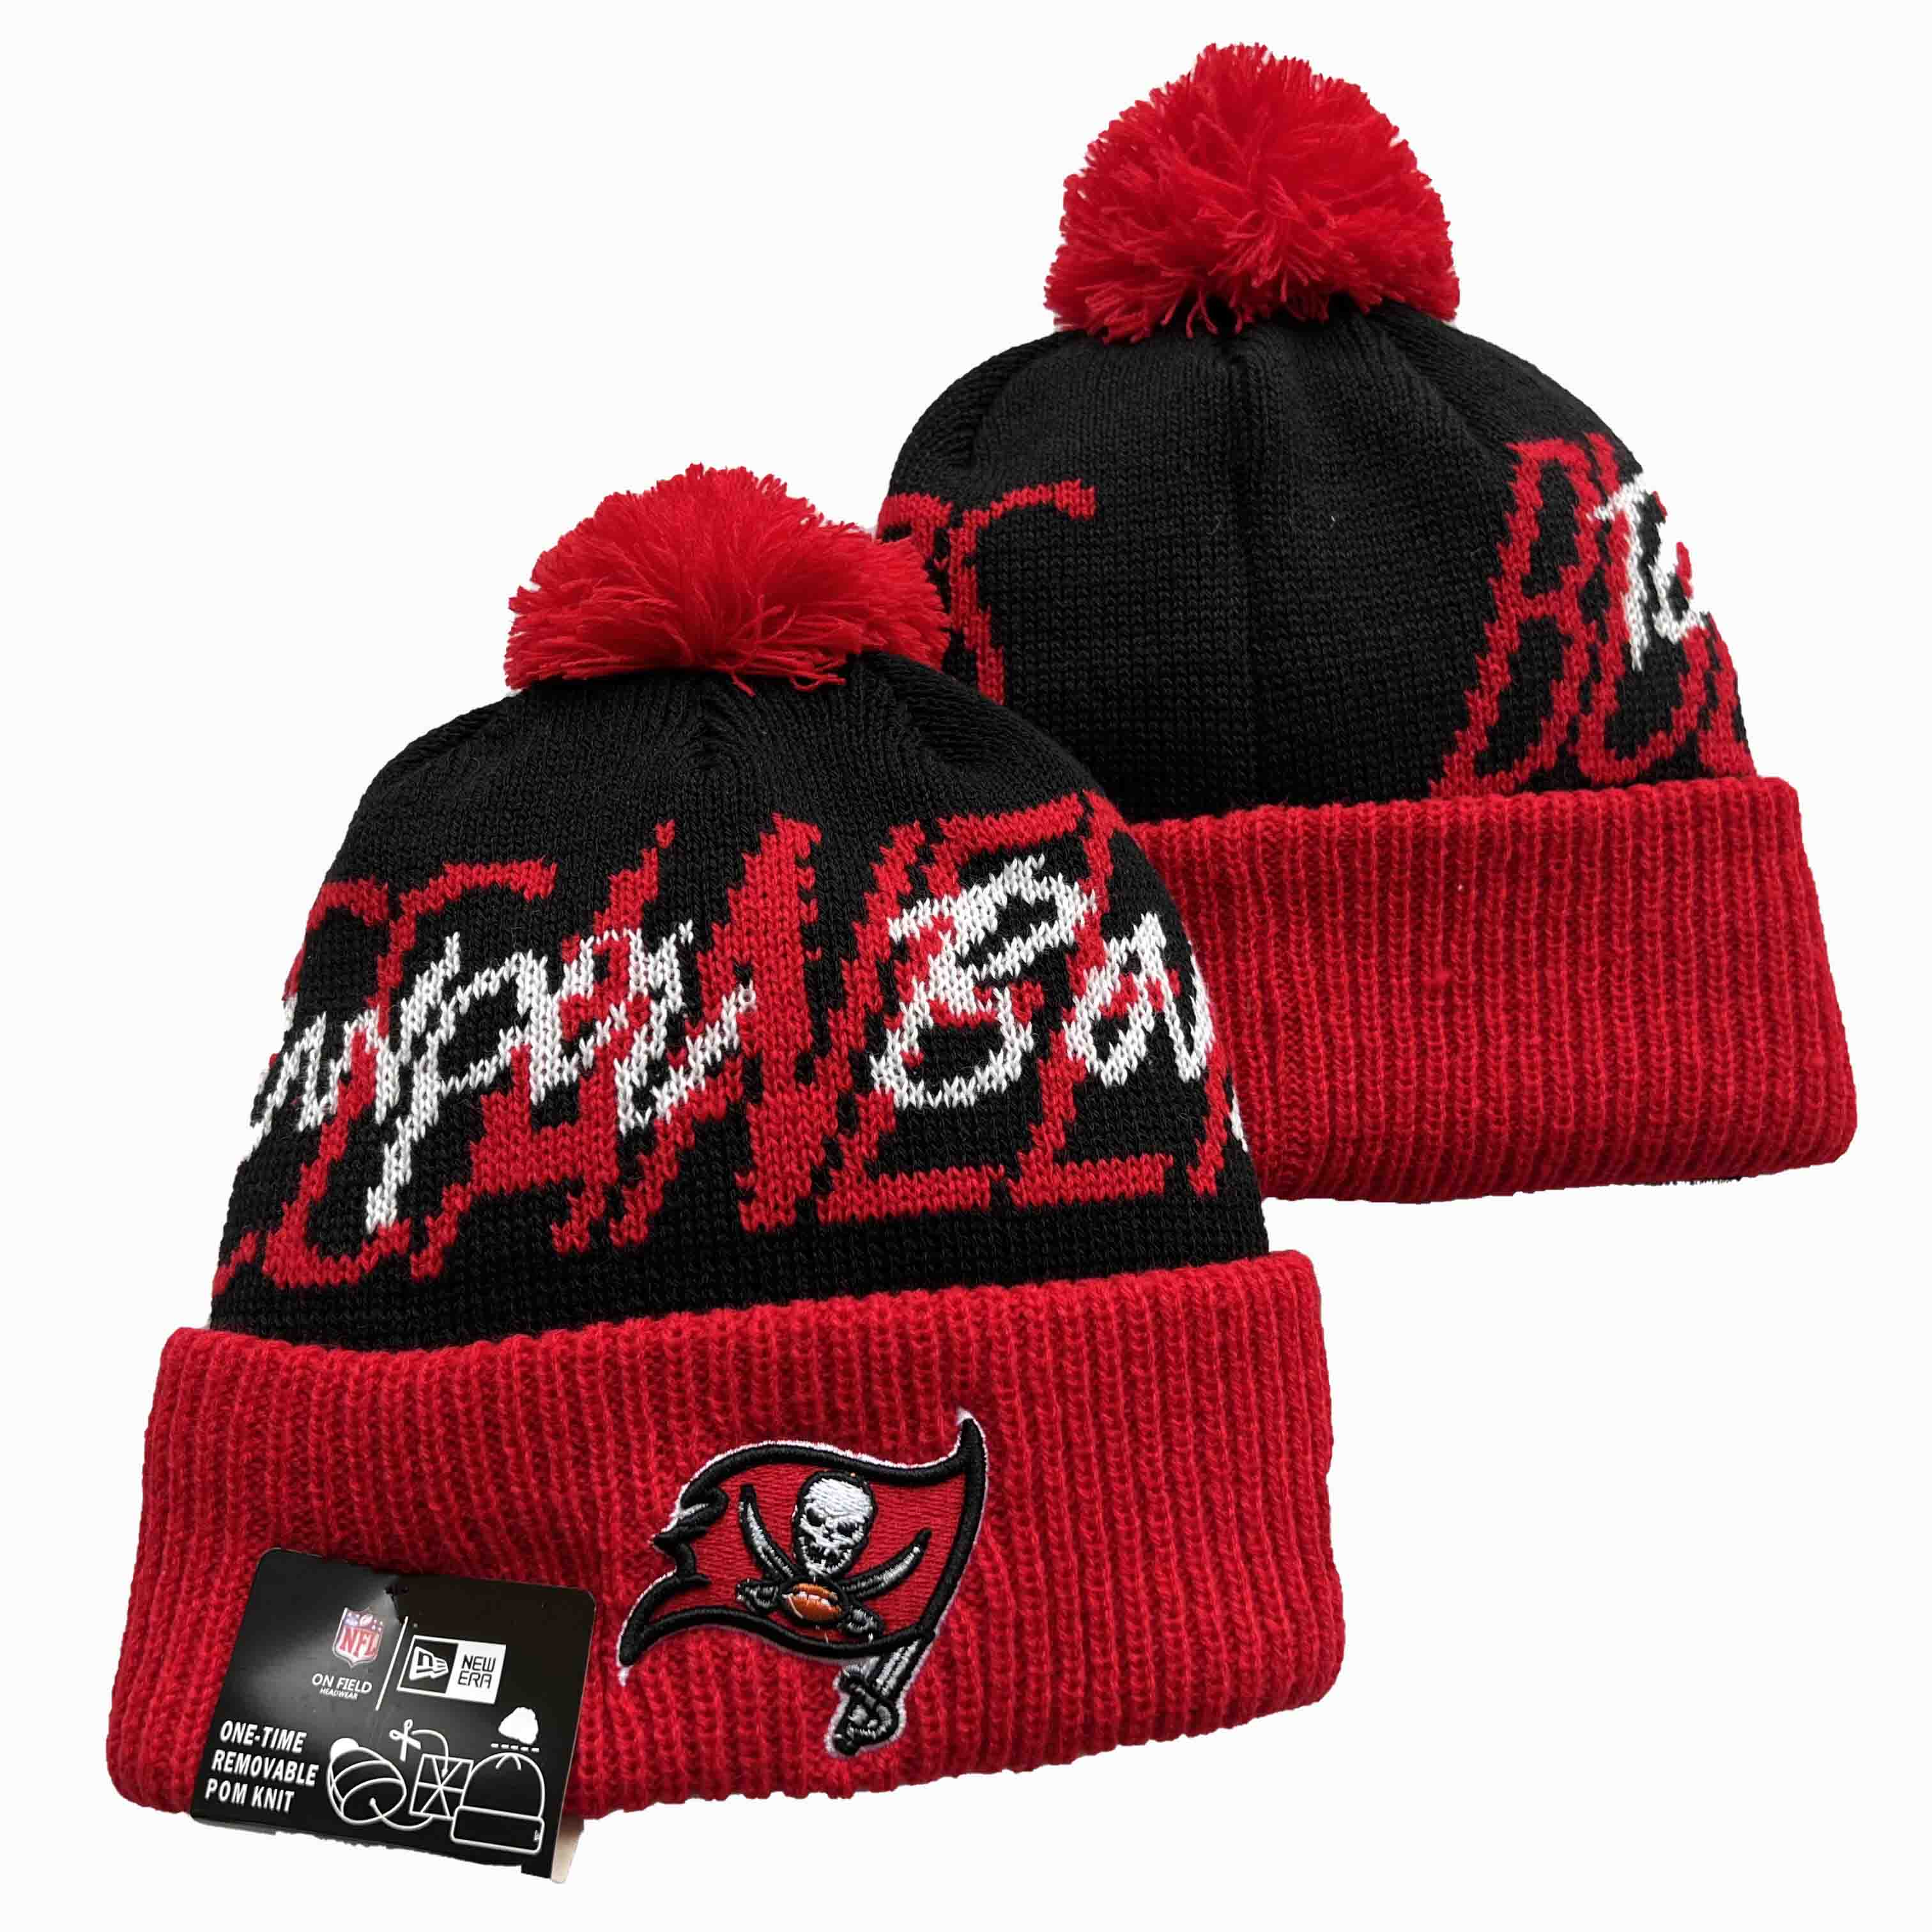 NFL Tampa Bay Buccaneers Beanies Knit Hats-YD1276